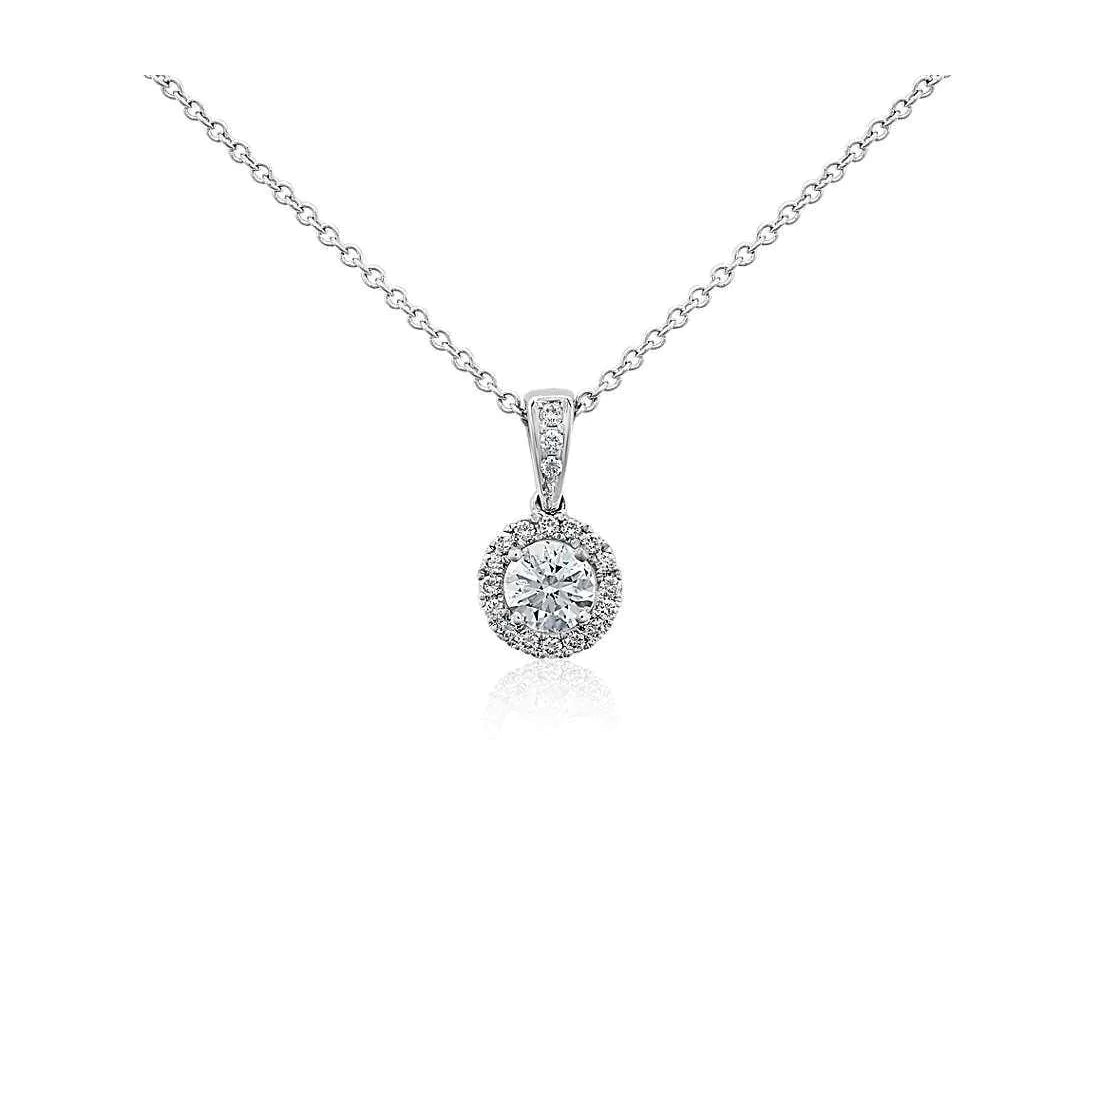 1.69 Carats Round Cut Real Diamond Pendant Necklace New White Gold 14K